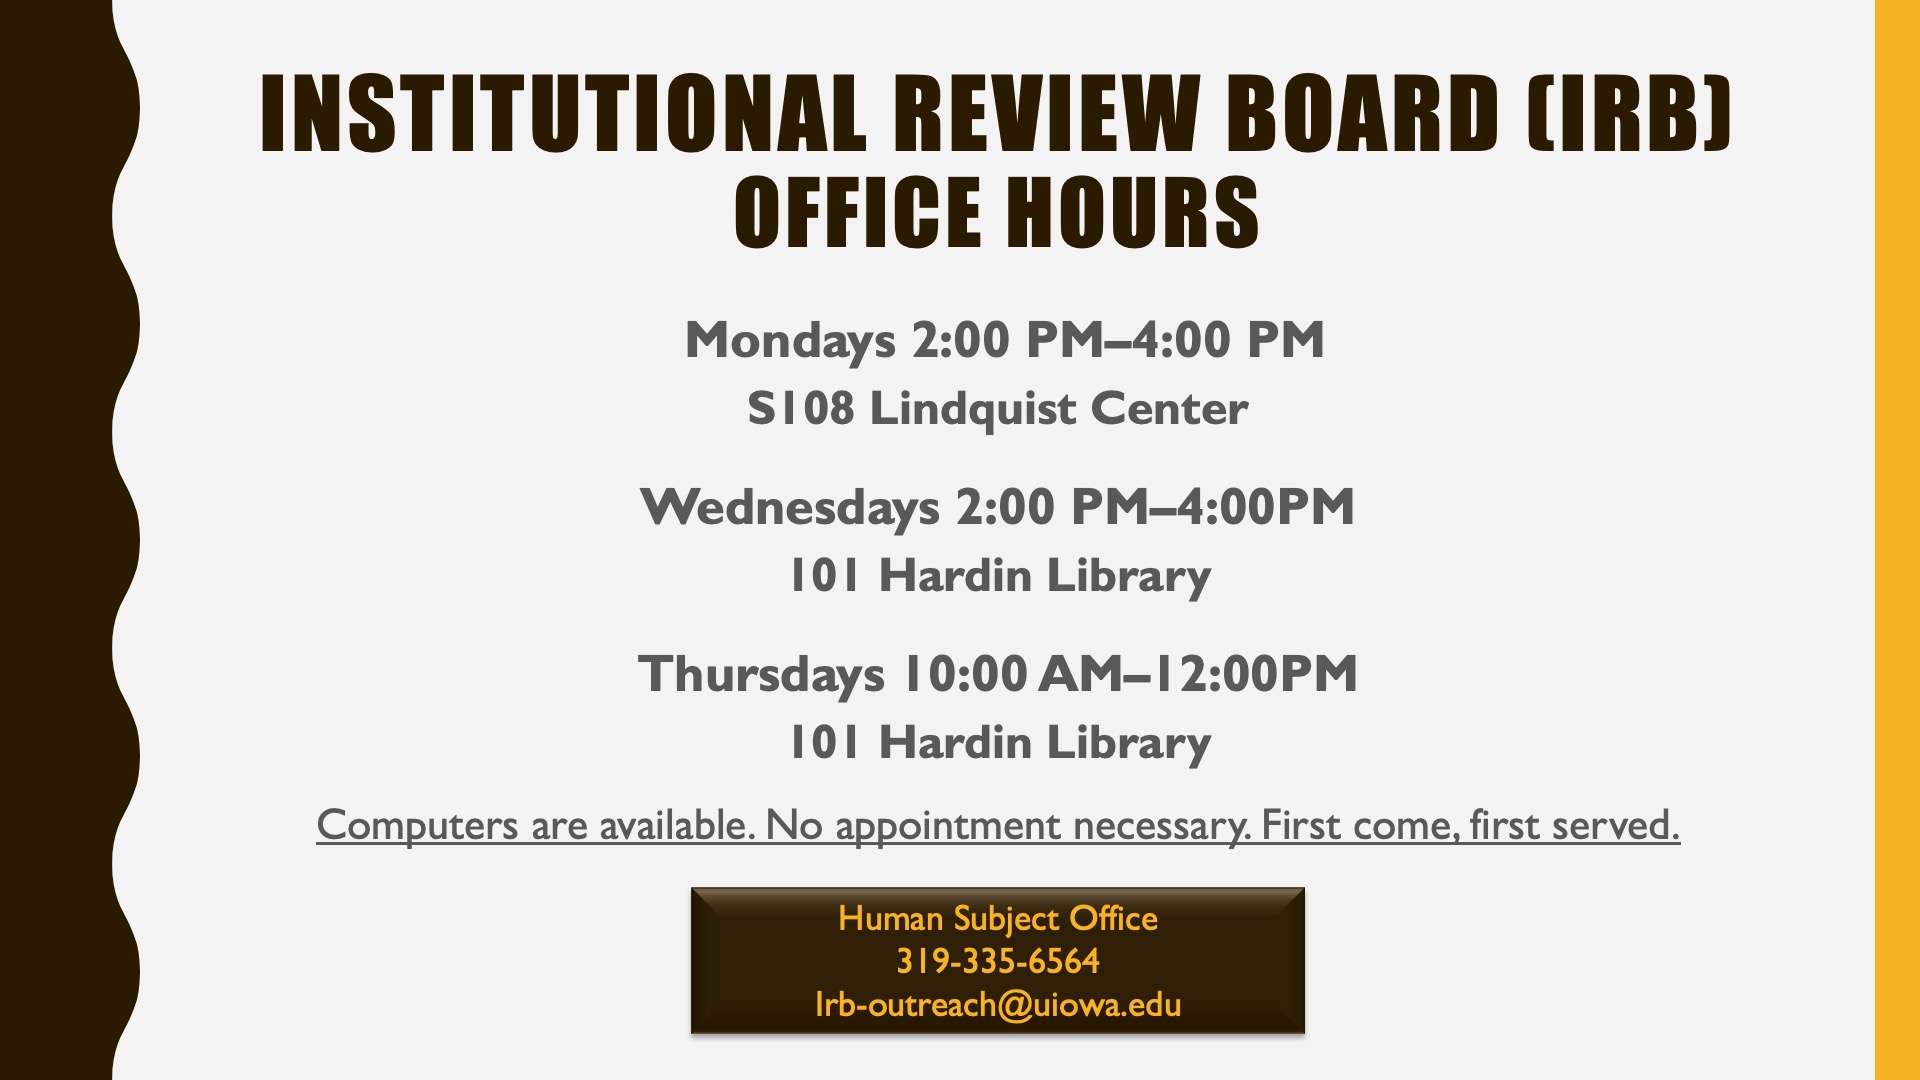 IRB Office Hours